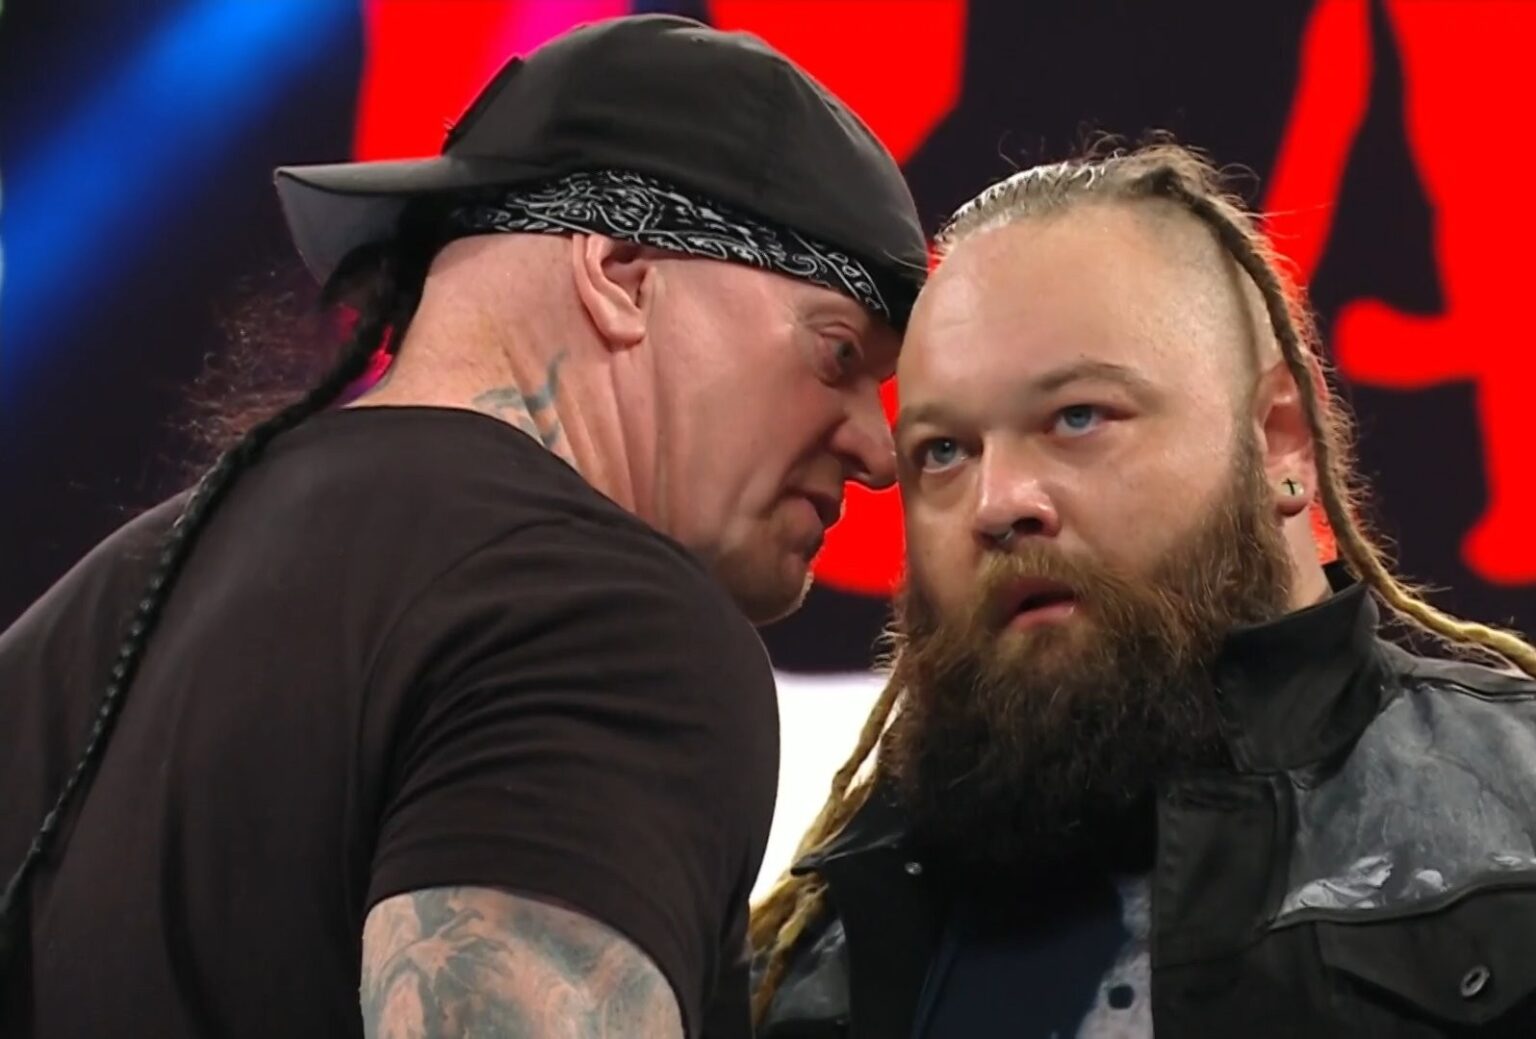 WWE legend The Undertaker returns as American Badass and joins Bray Wyatt in LA Knight attack